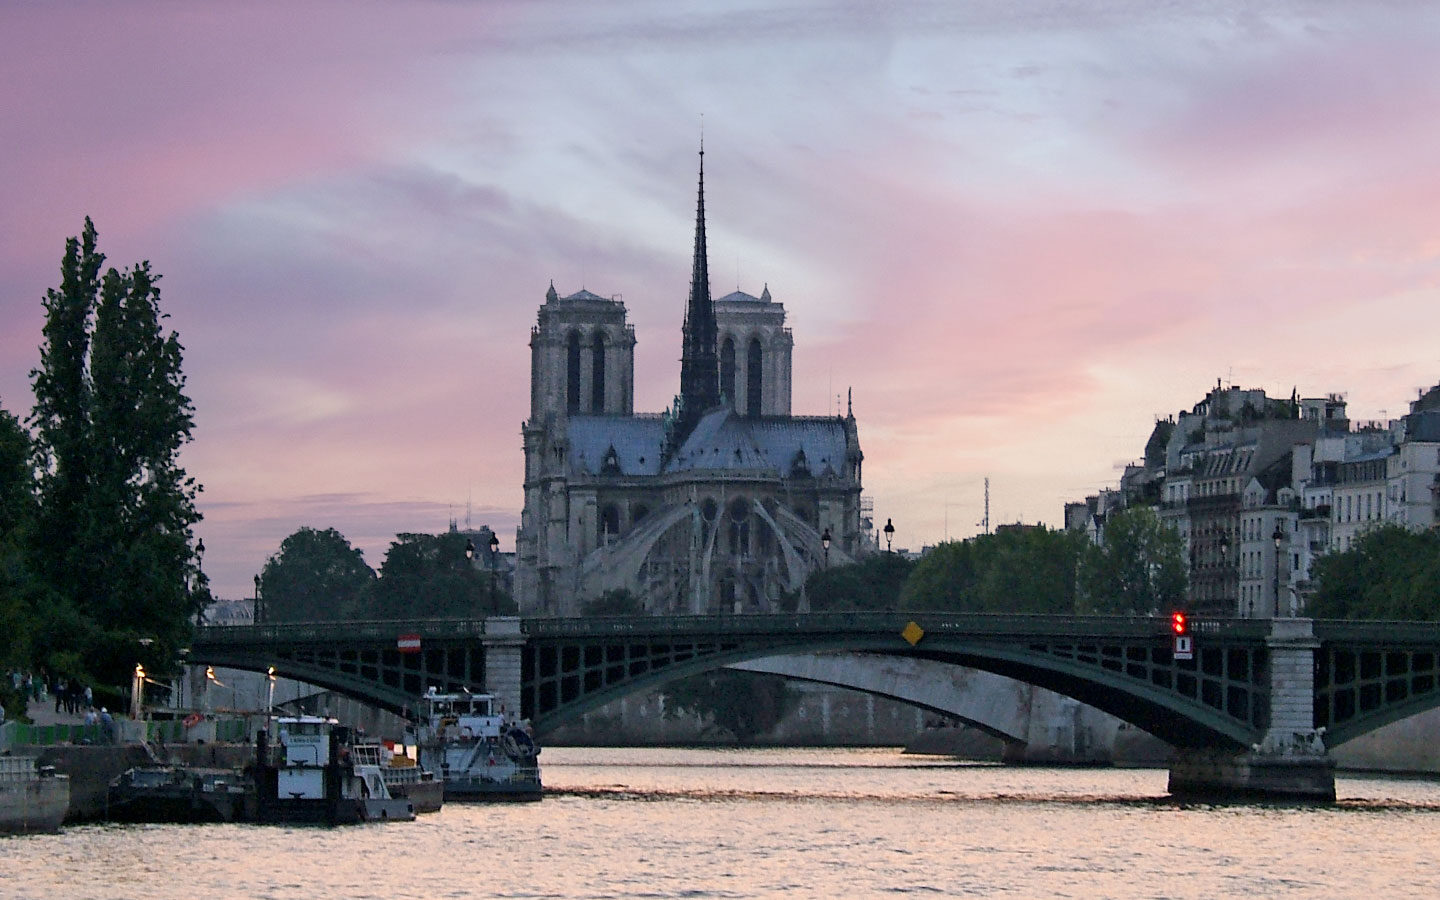 Views of Notre Dame Cathedral in Paris before the 2019 fire